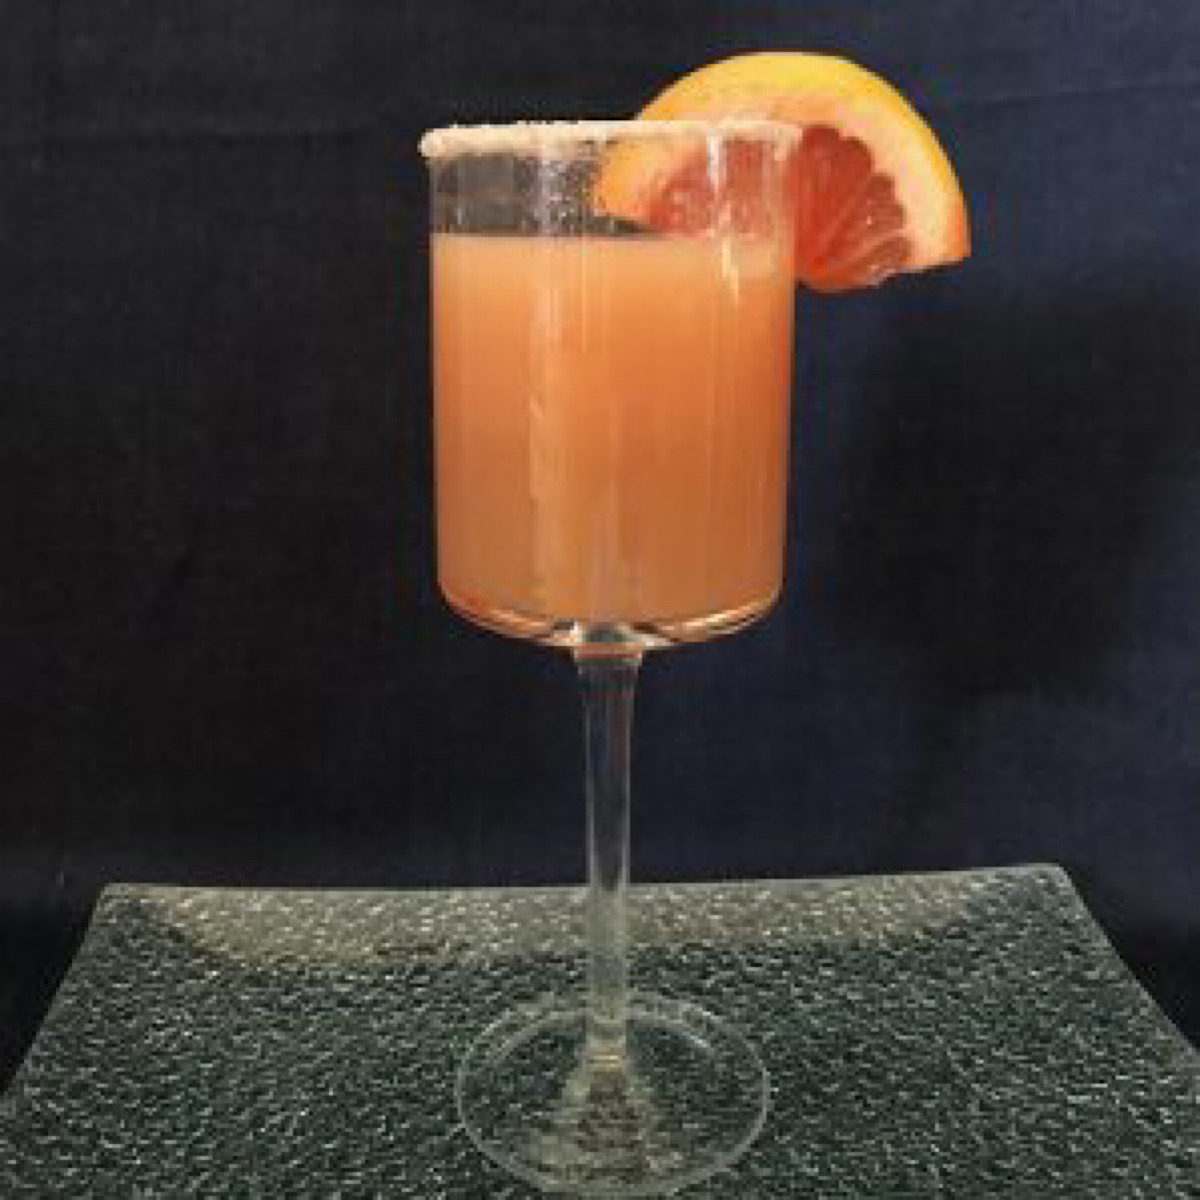 Salty dog cocktail with grapefruit shrub syrup